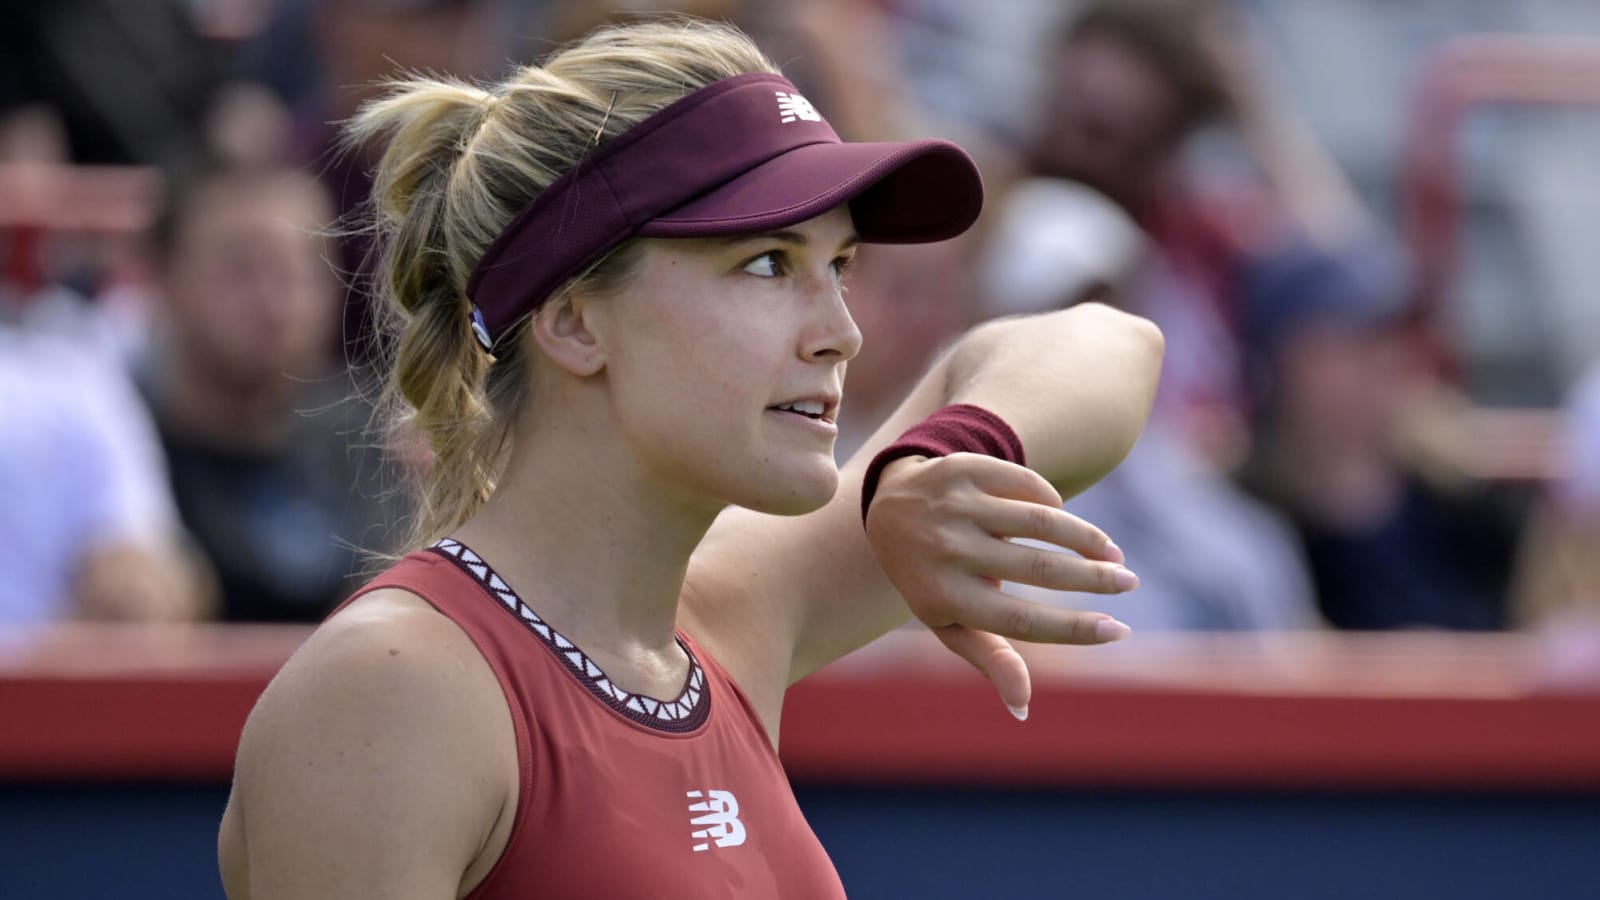 Watch: Eugenie Bouchard to make a shocking return to tennis after 2 years? Here’s what we know